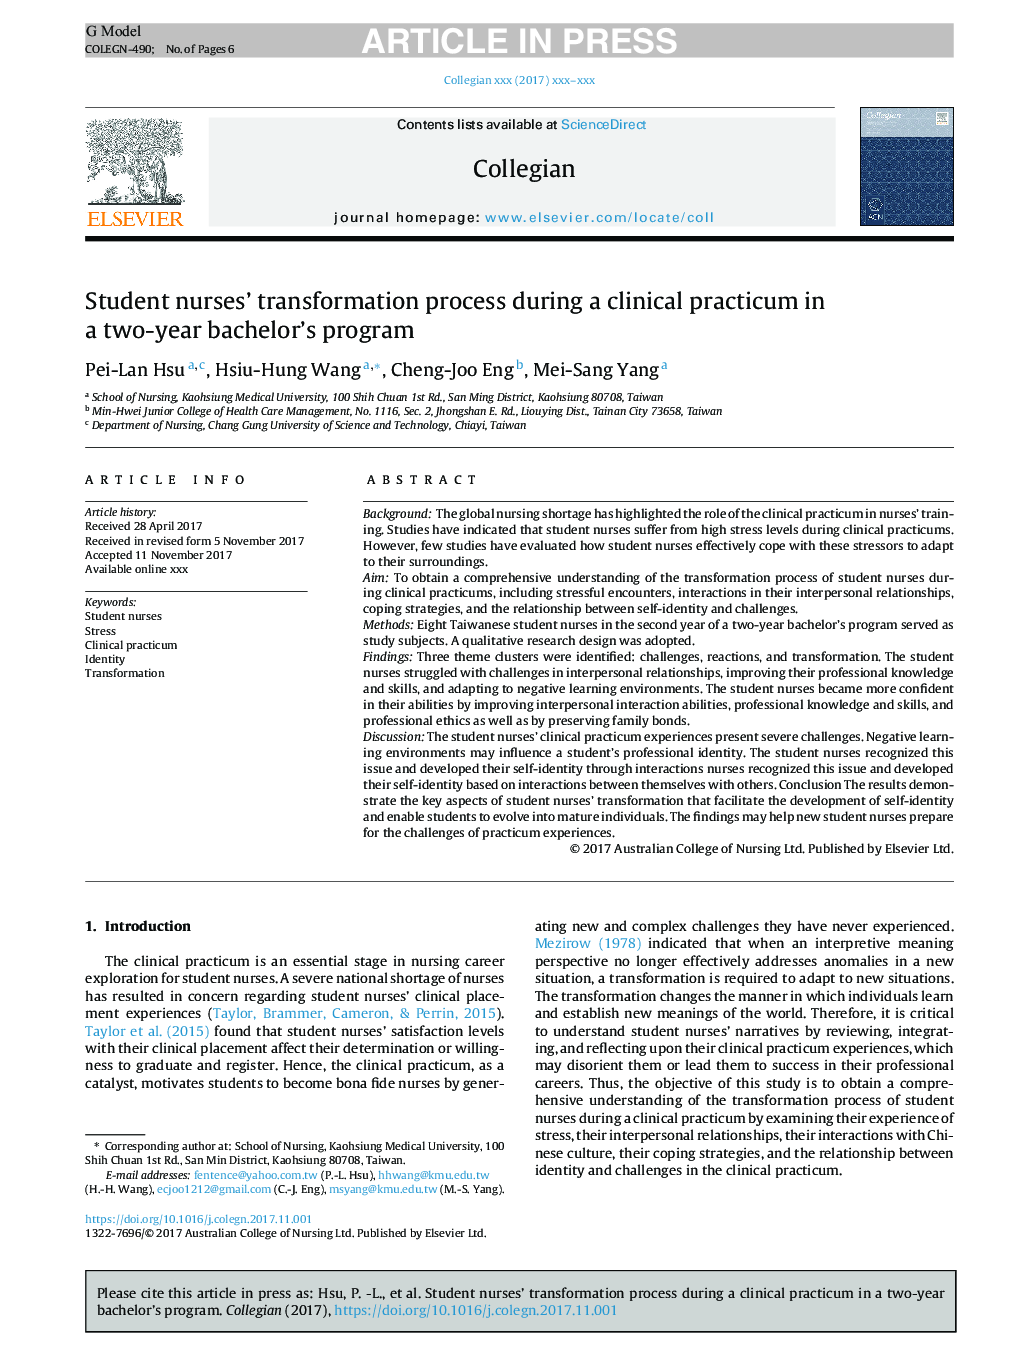 Student nurses' transformation process during a clinical practicum in a two-year bachelor's program